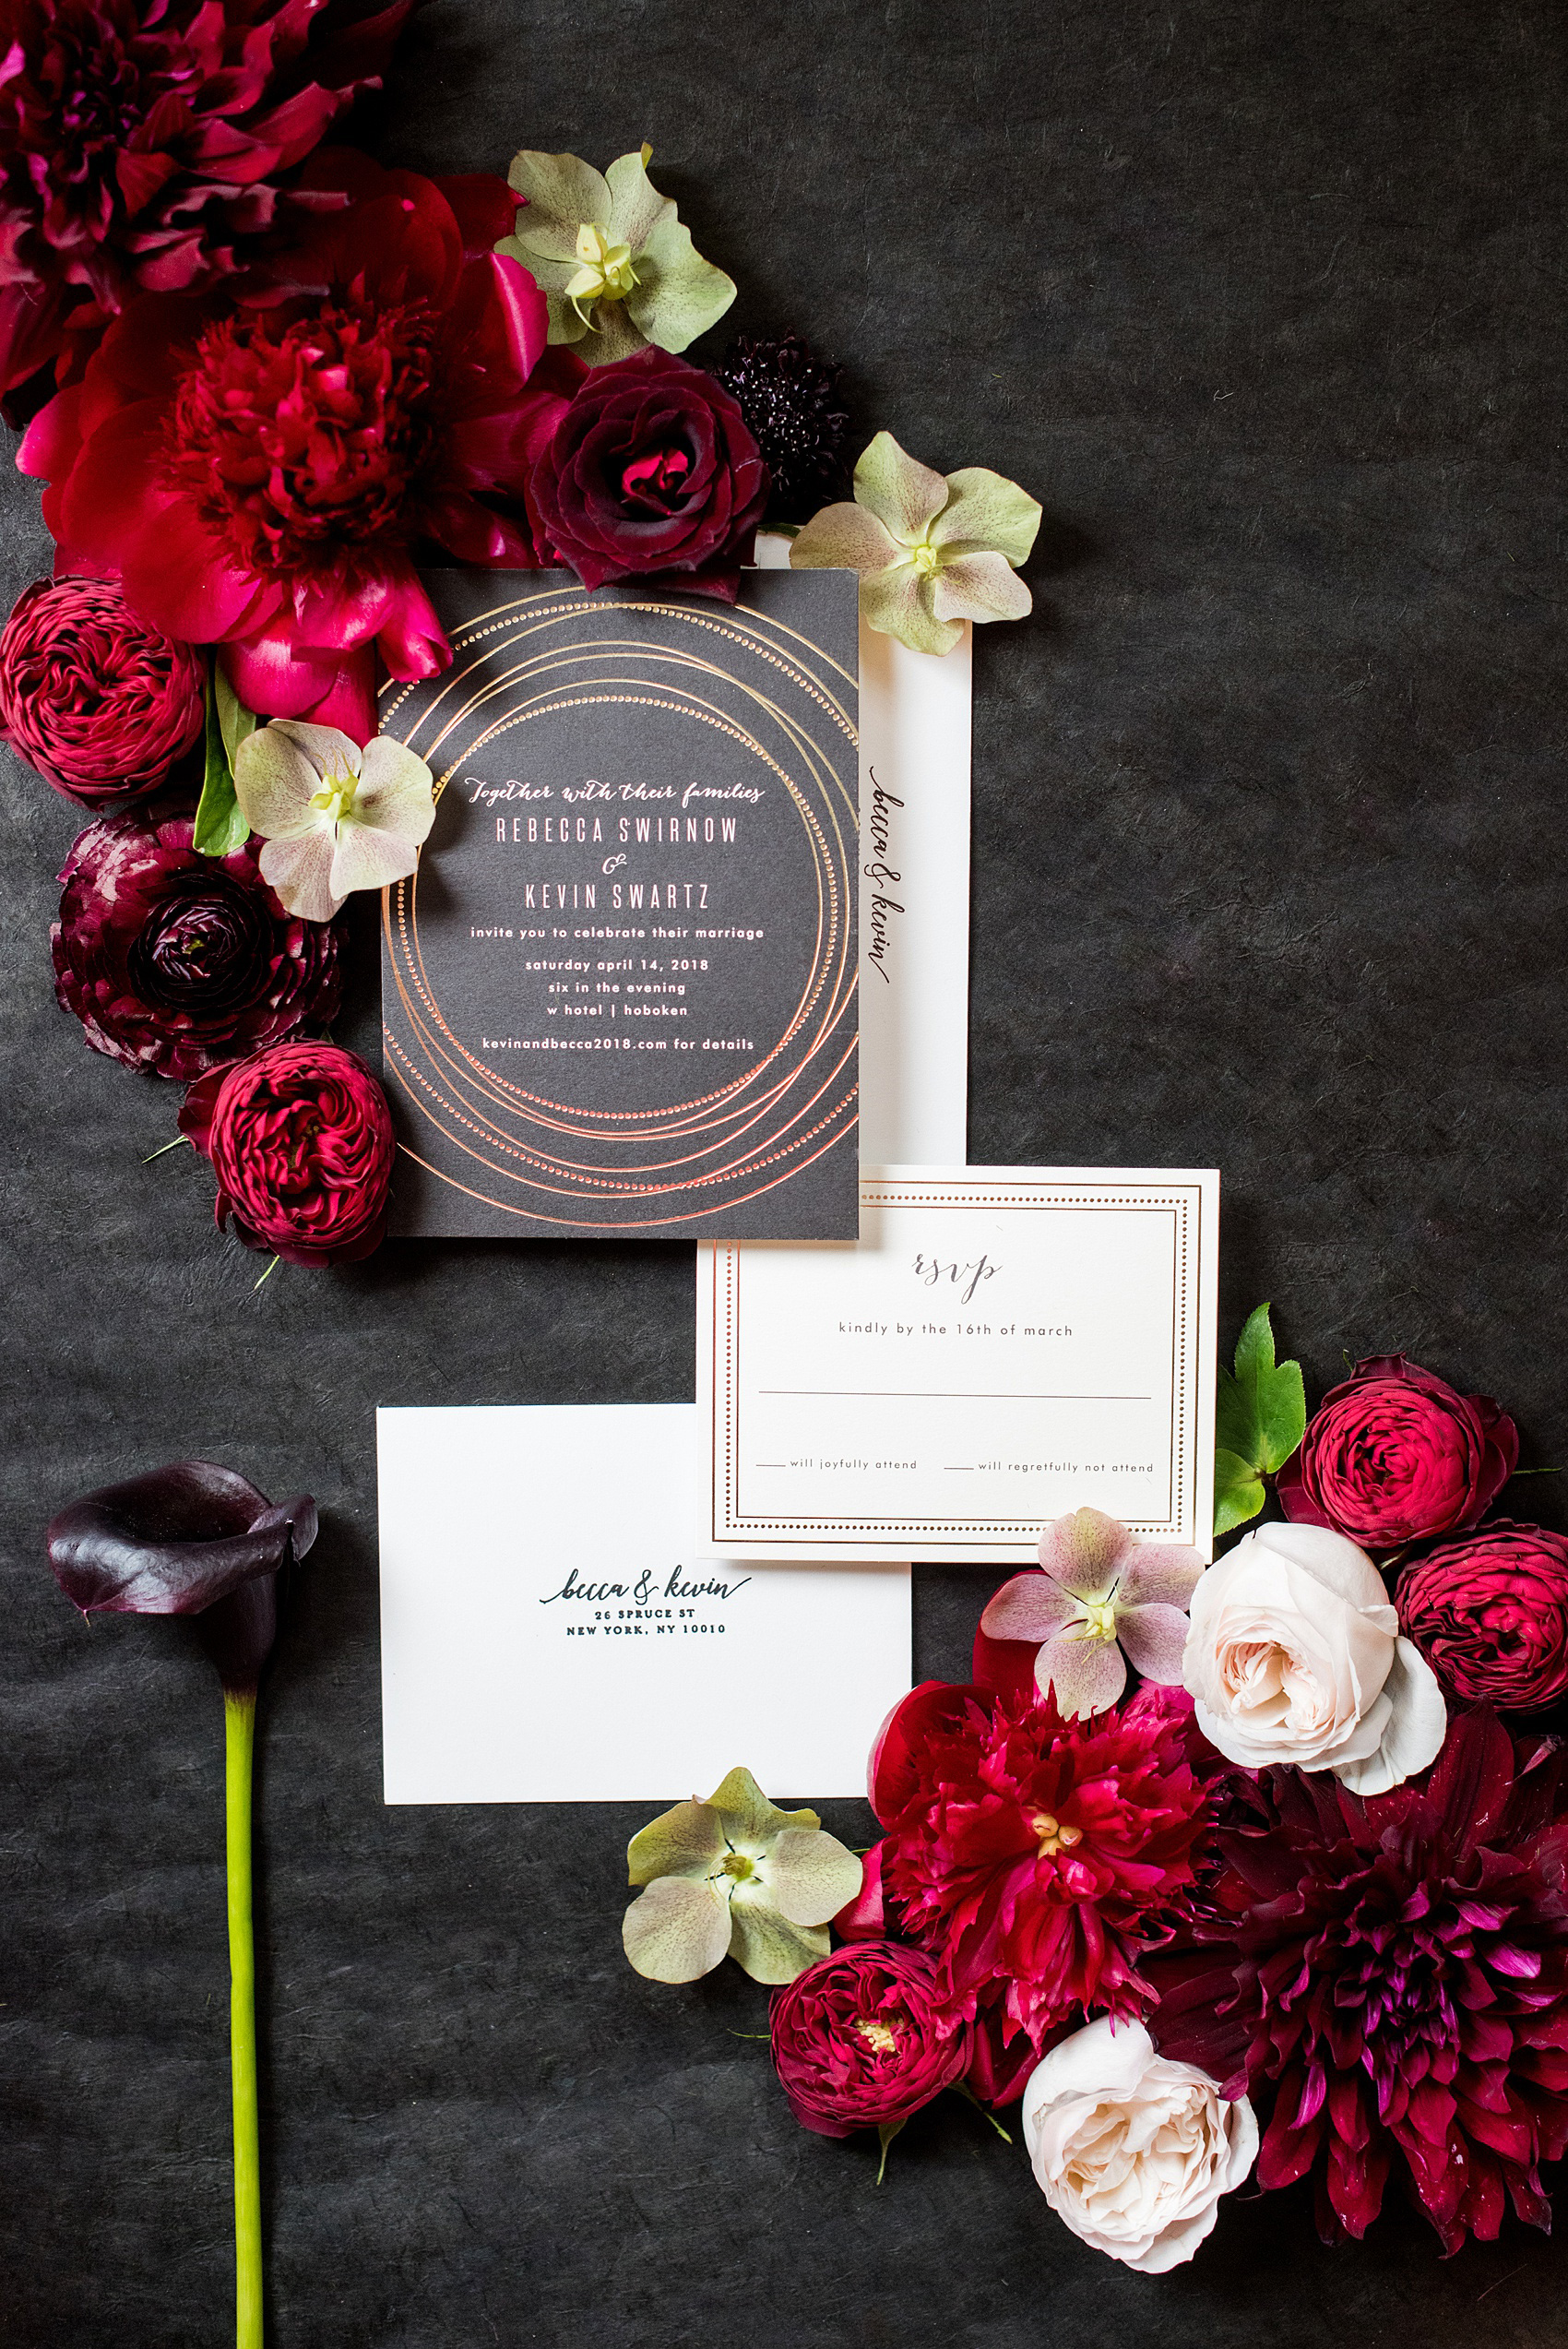 W Hoboken wedding photos by Mikkel Paige Photography at this NJ venue. Pictures in this well known New Jersey city with a view of the NYC skyline. This detail image includes a black and gold invitation from Minted, and flowers from Sachi Rose designed in a lay flat suite by the photographer. Red, fuchsia and burgundy peonies, calla lilies, Japanese roses, helebores dahlias and ranunculus complete the scene. #mikkelpaige #HobokenWedding #NewJerseyPhotographer #NewYorkCityPhotographer #NYCweddingphotographer #brideandgroomphotos #redpeonies #romanticwedding #springwedding #CityWedding